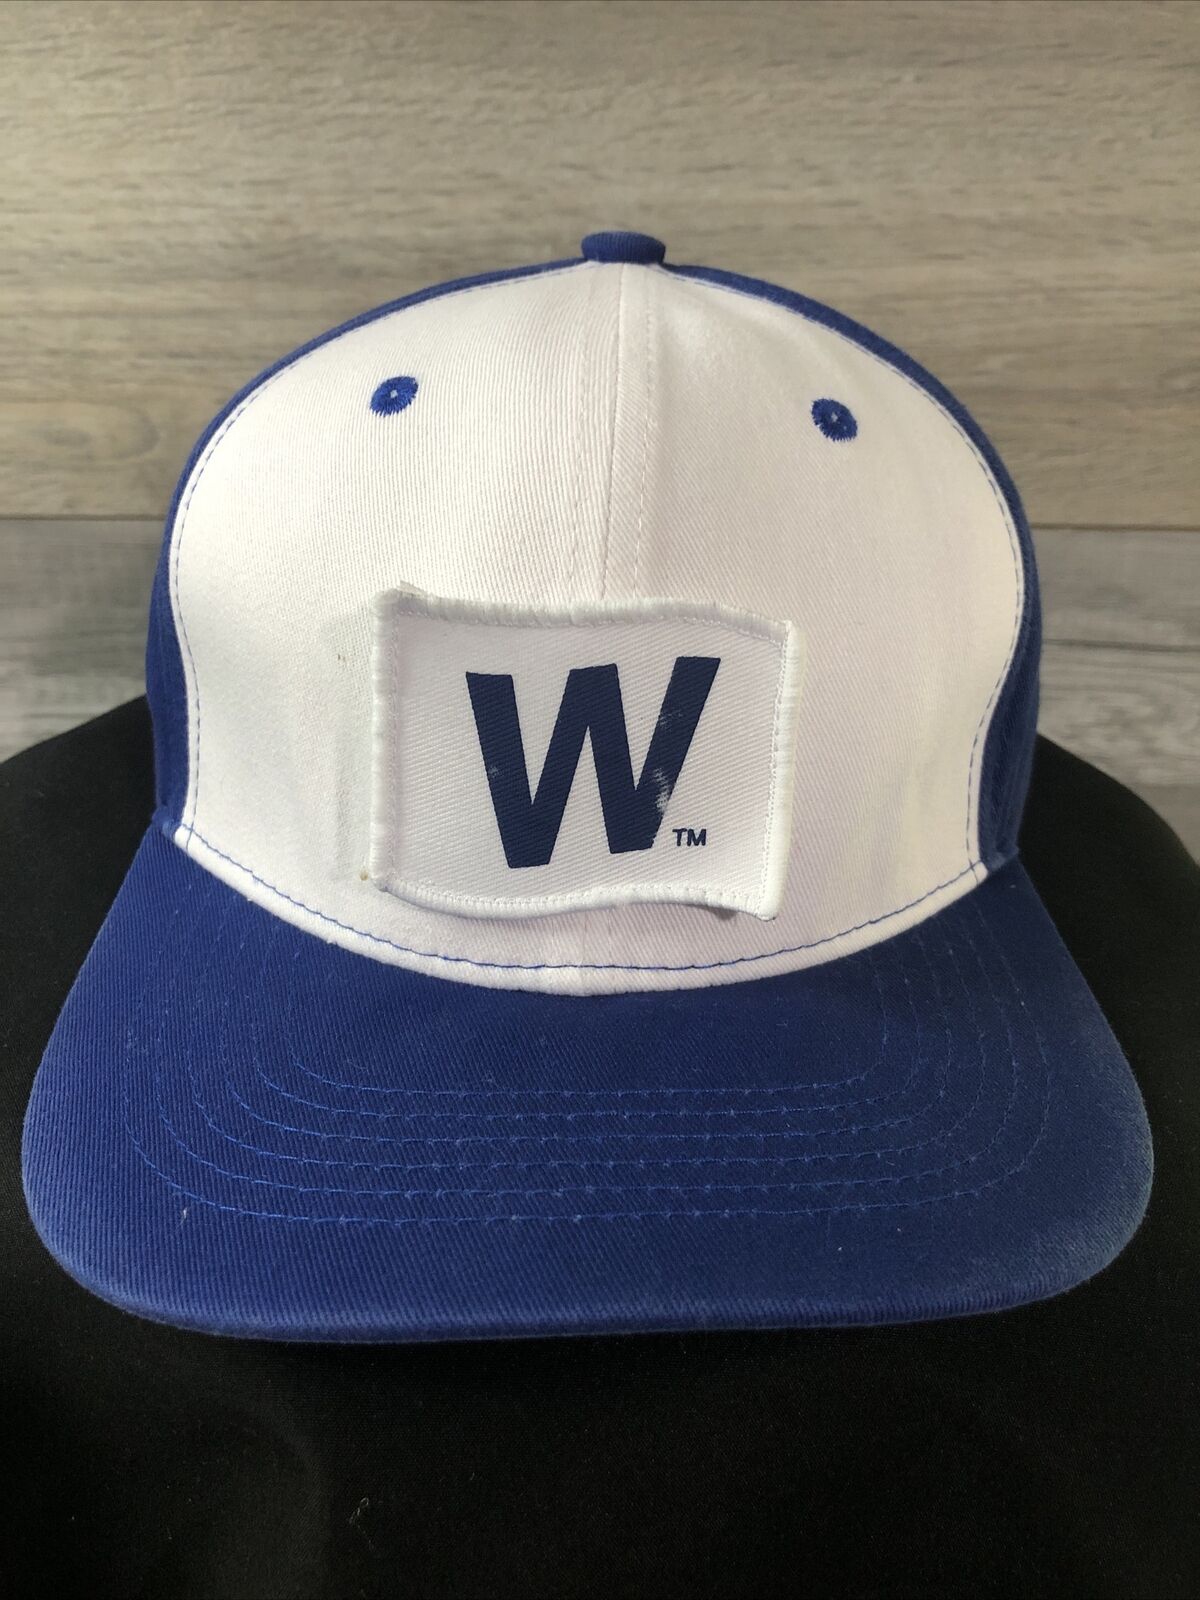 Chicago Cubs Baseball Hat Budweiser Wrigley Giveaway changeable with patch